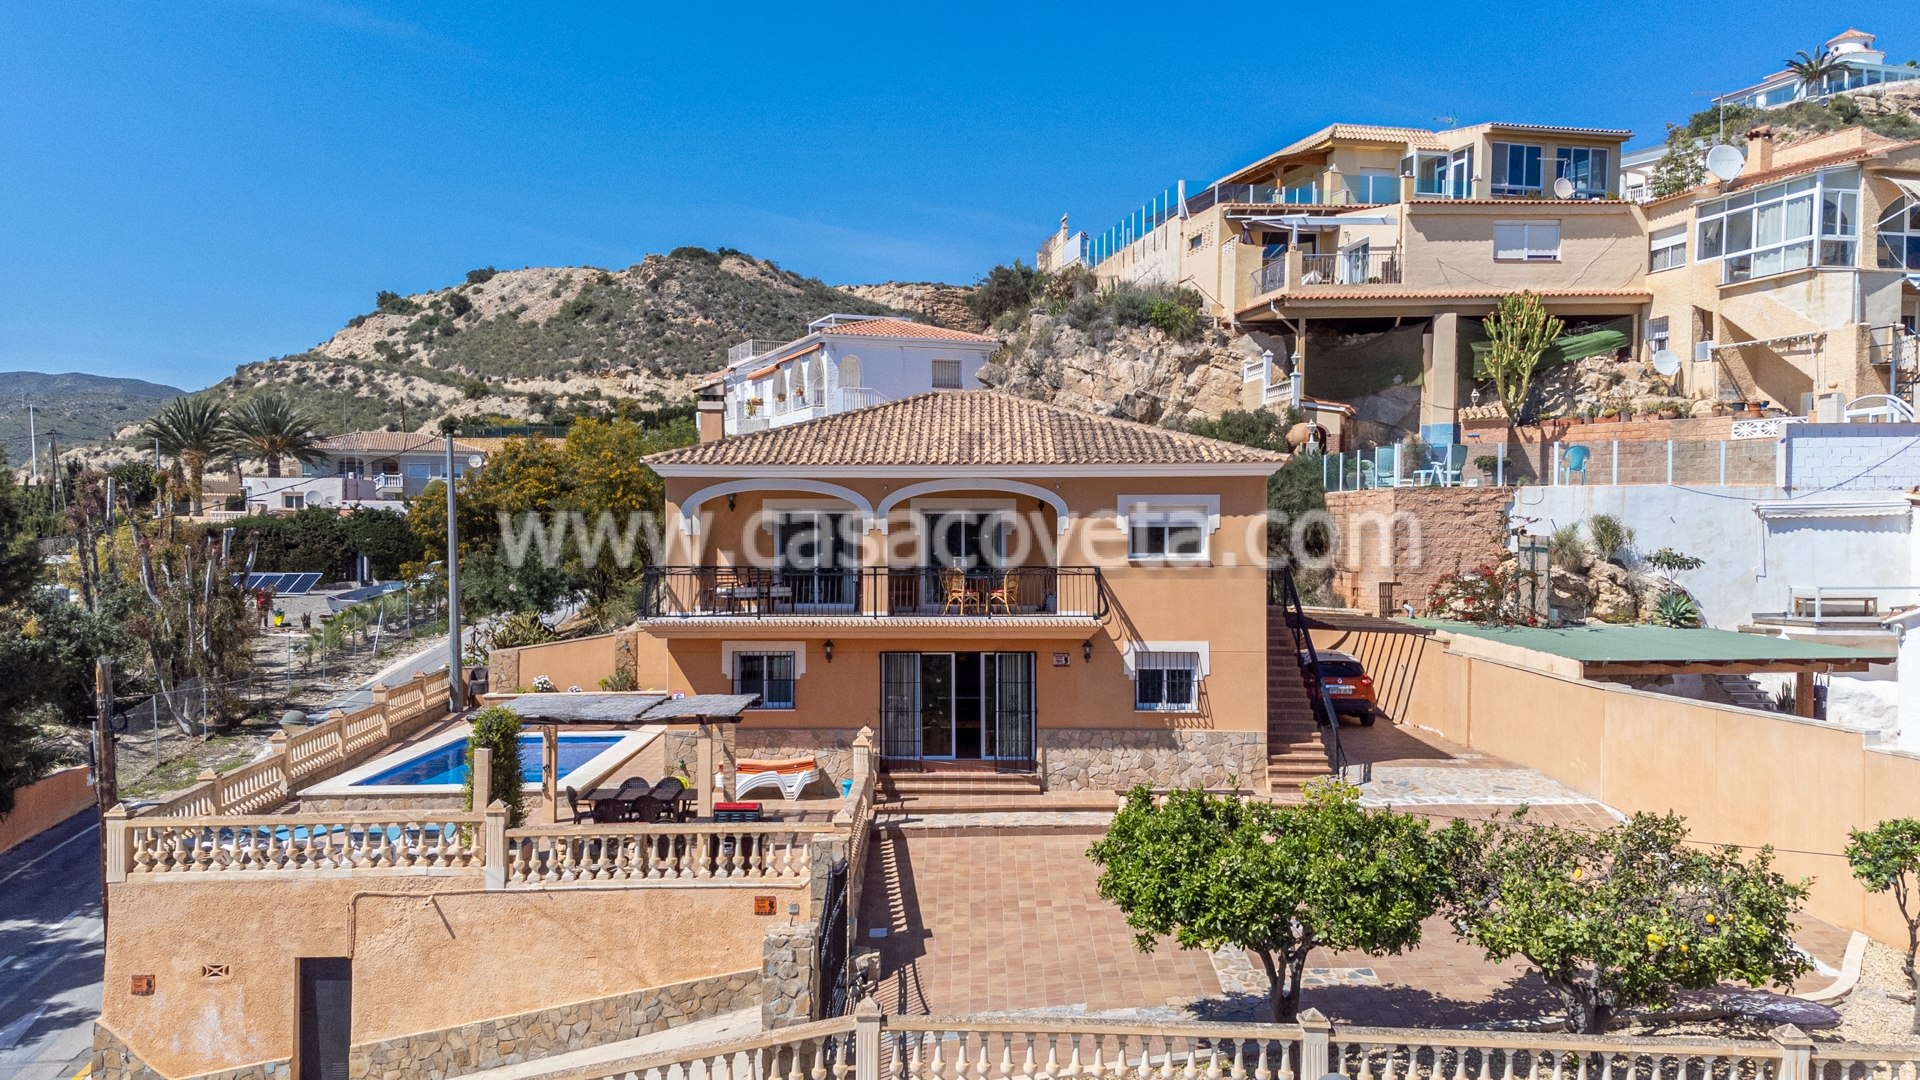 Beautifull Villa Dos Perlas, View On The Sea, Private Pool And Jacuzzi, 10 Pers., Ref. 590